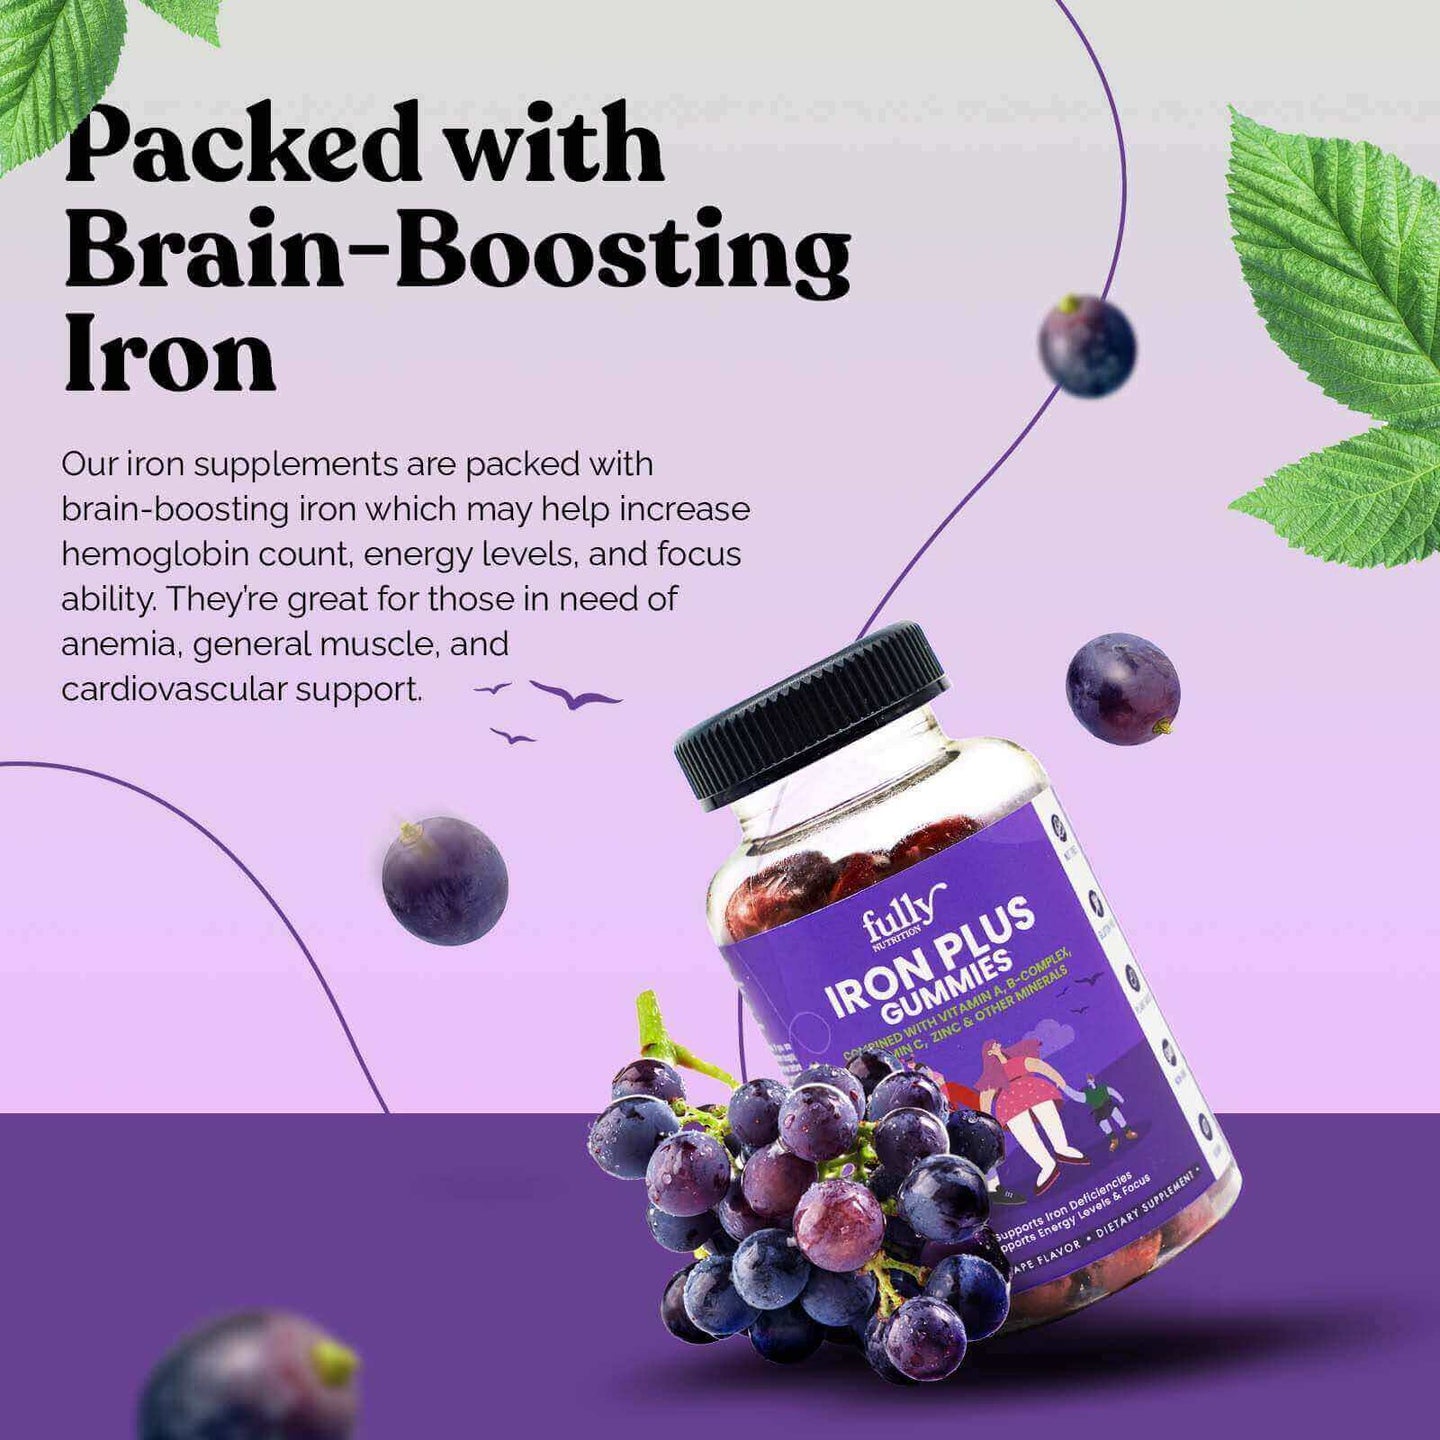 Fully Nutritious Iron Plus gummies, packed with brain-boosting iron to support cognitive function and healthy red blood cells